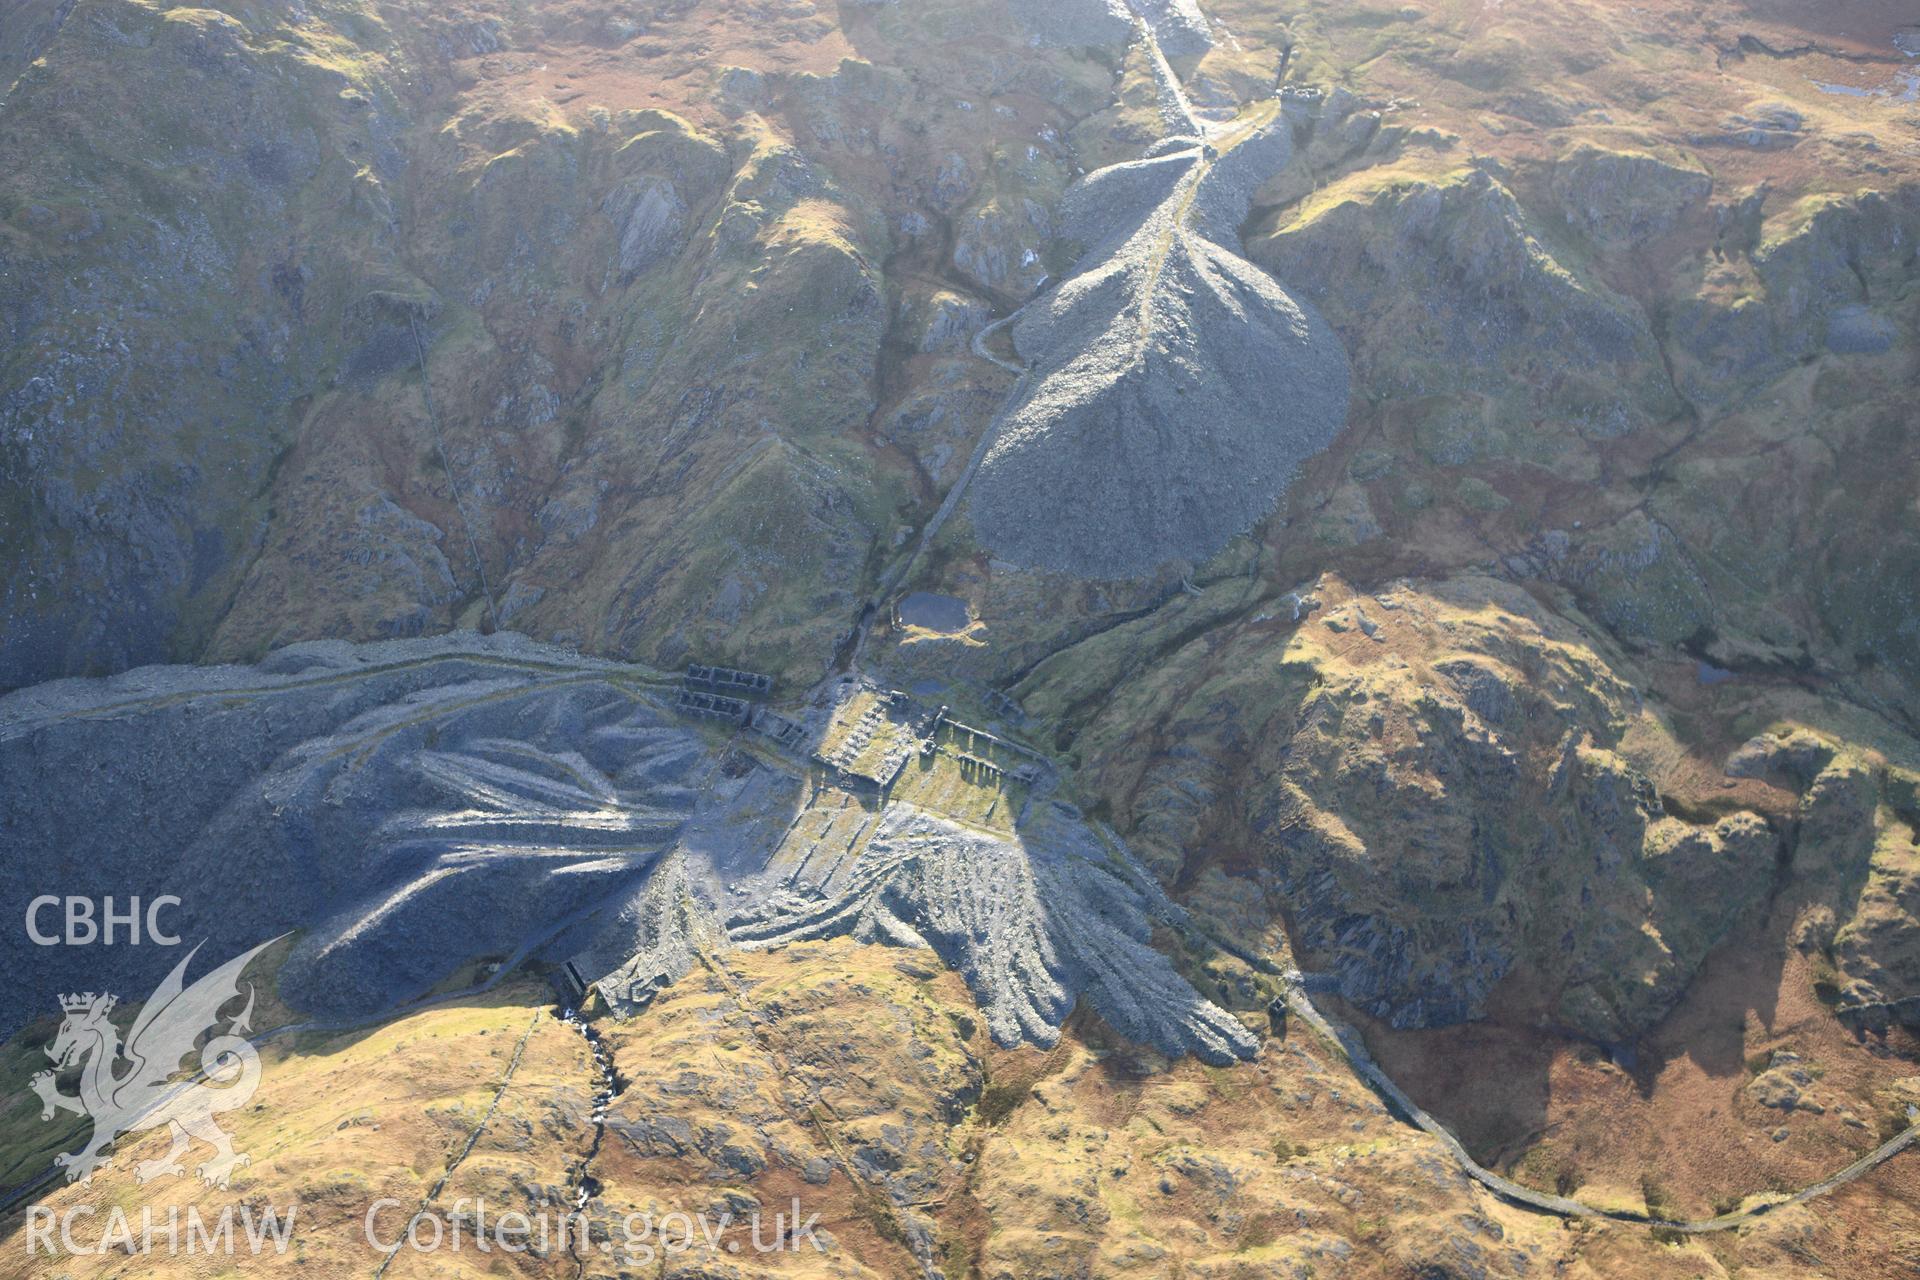 RCAHMW colour oblique photograph of Rhosydd slate quarry, Level 9 mill. Taken by Toby Driver on 13/01/2012.